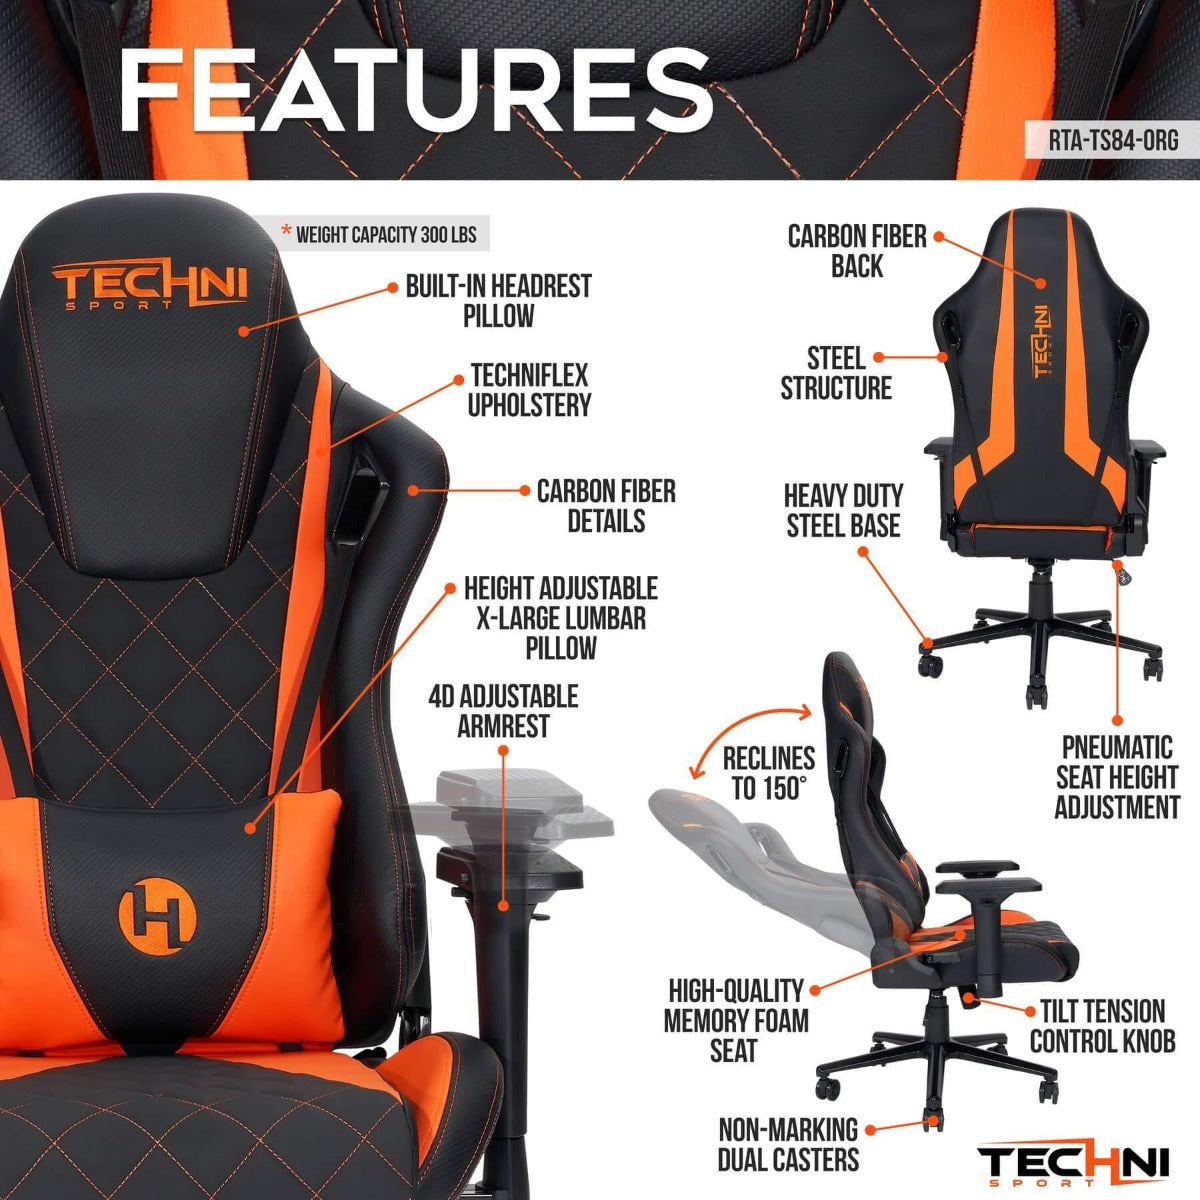 Techni Sport TS-84 Orange Ergonomic High Back Racer Style PC Gaming Chair RTA-TS84-ORG Features